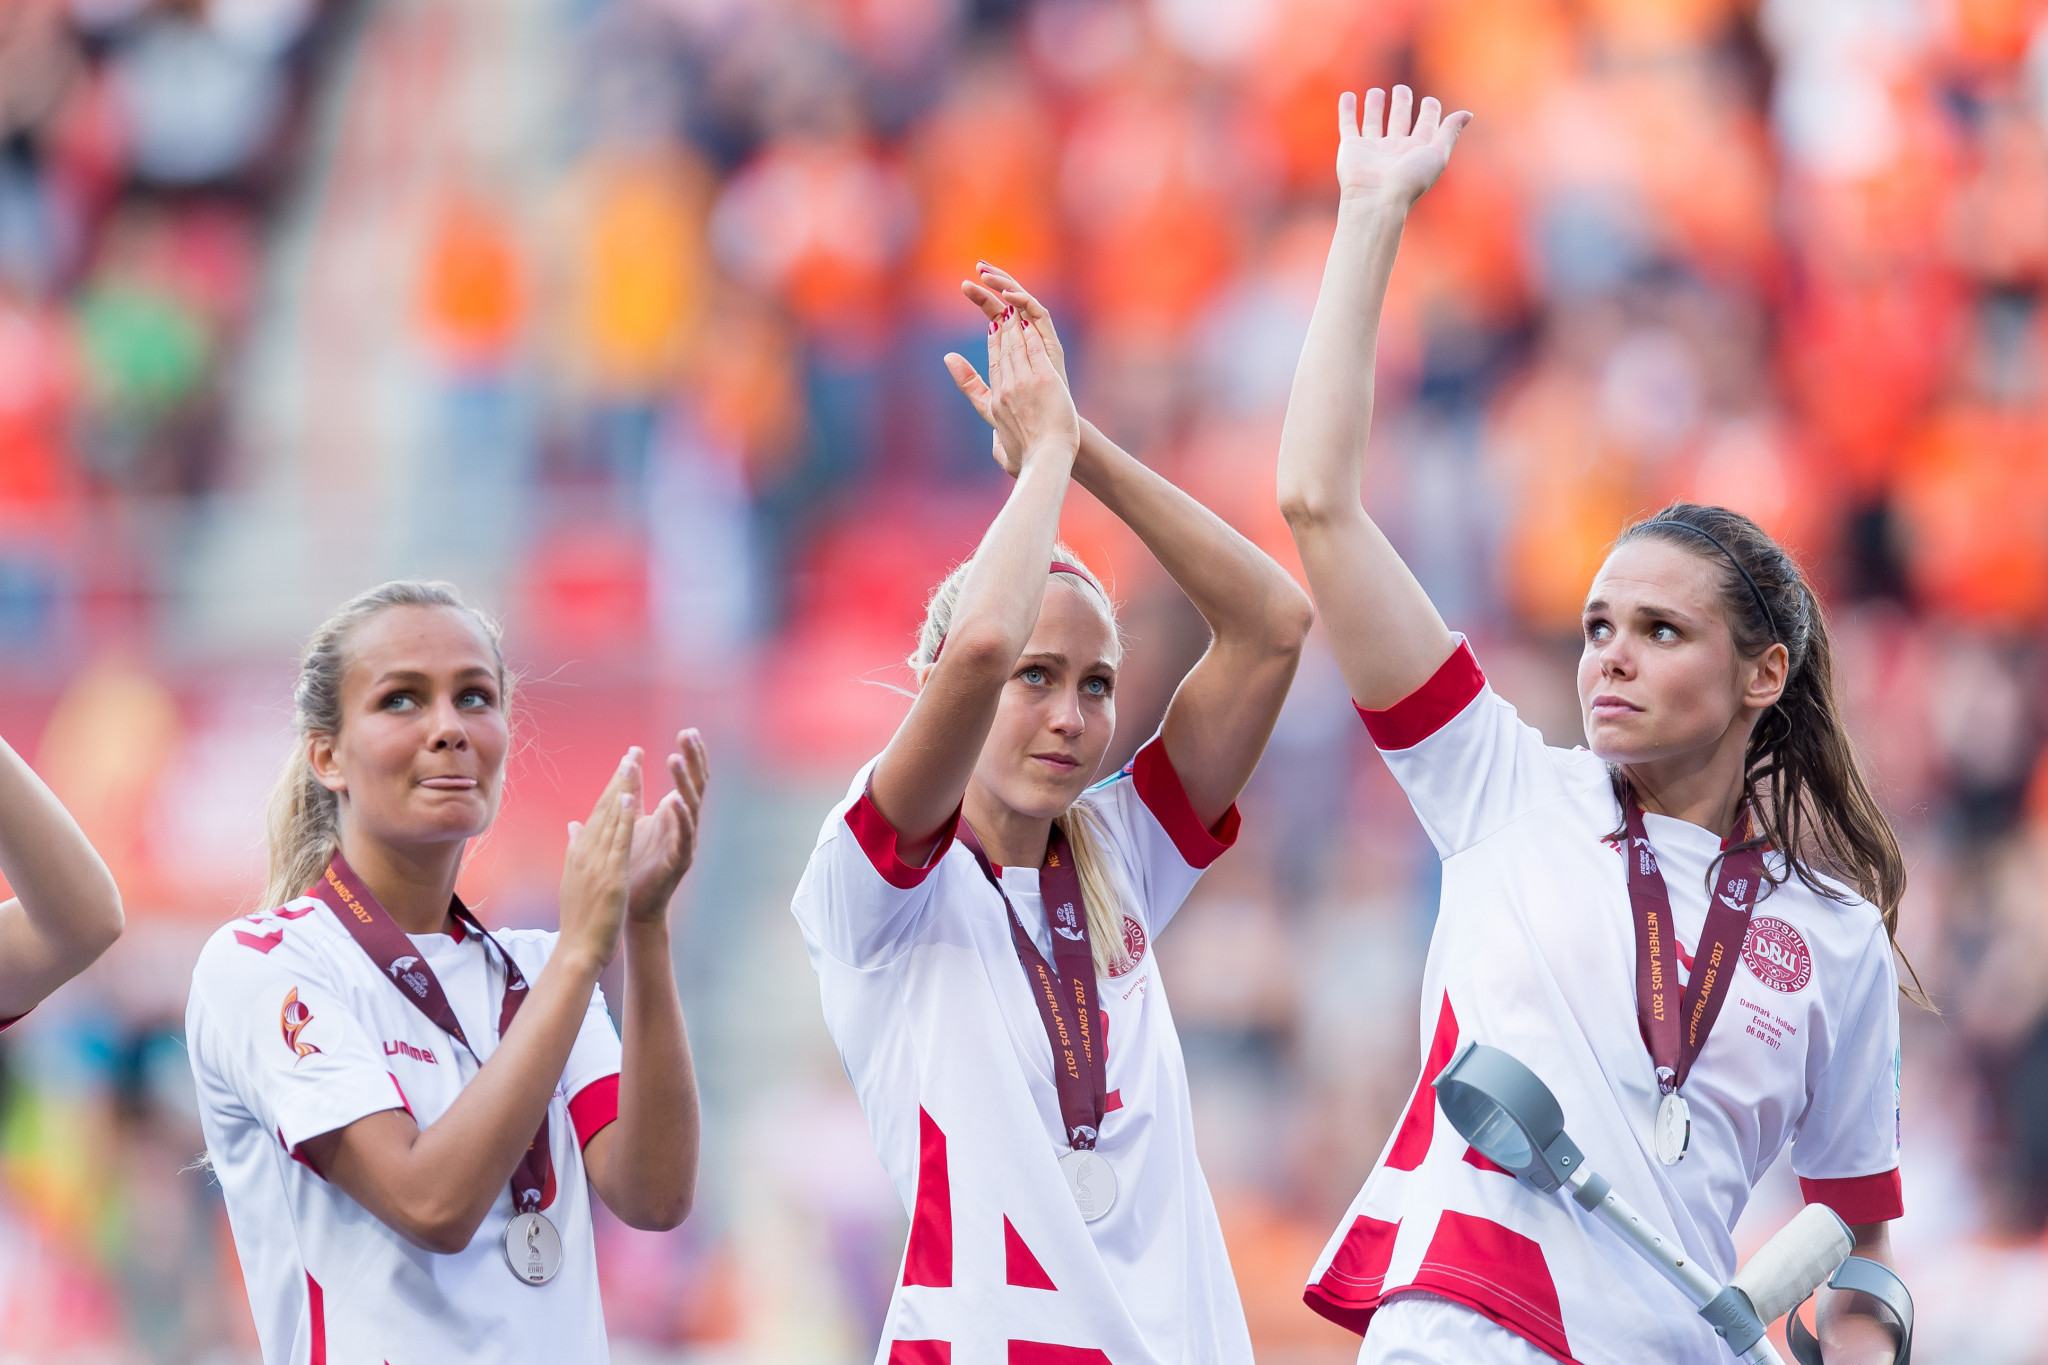 Denmark's women's team to play Croatia after agreeing partial pay resolution